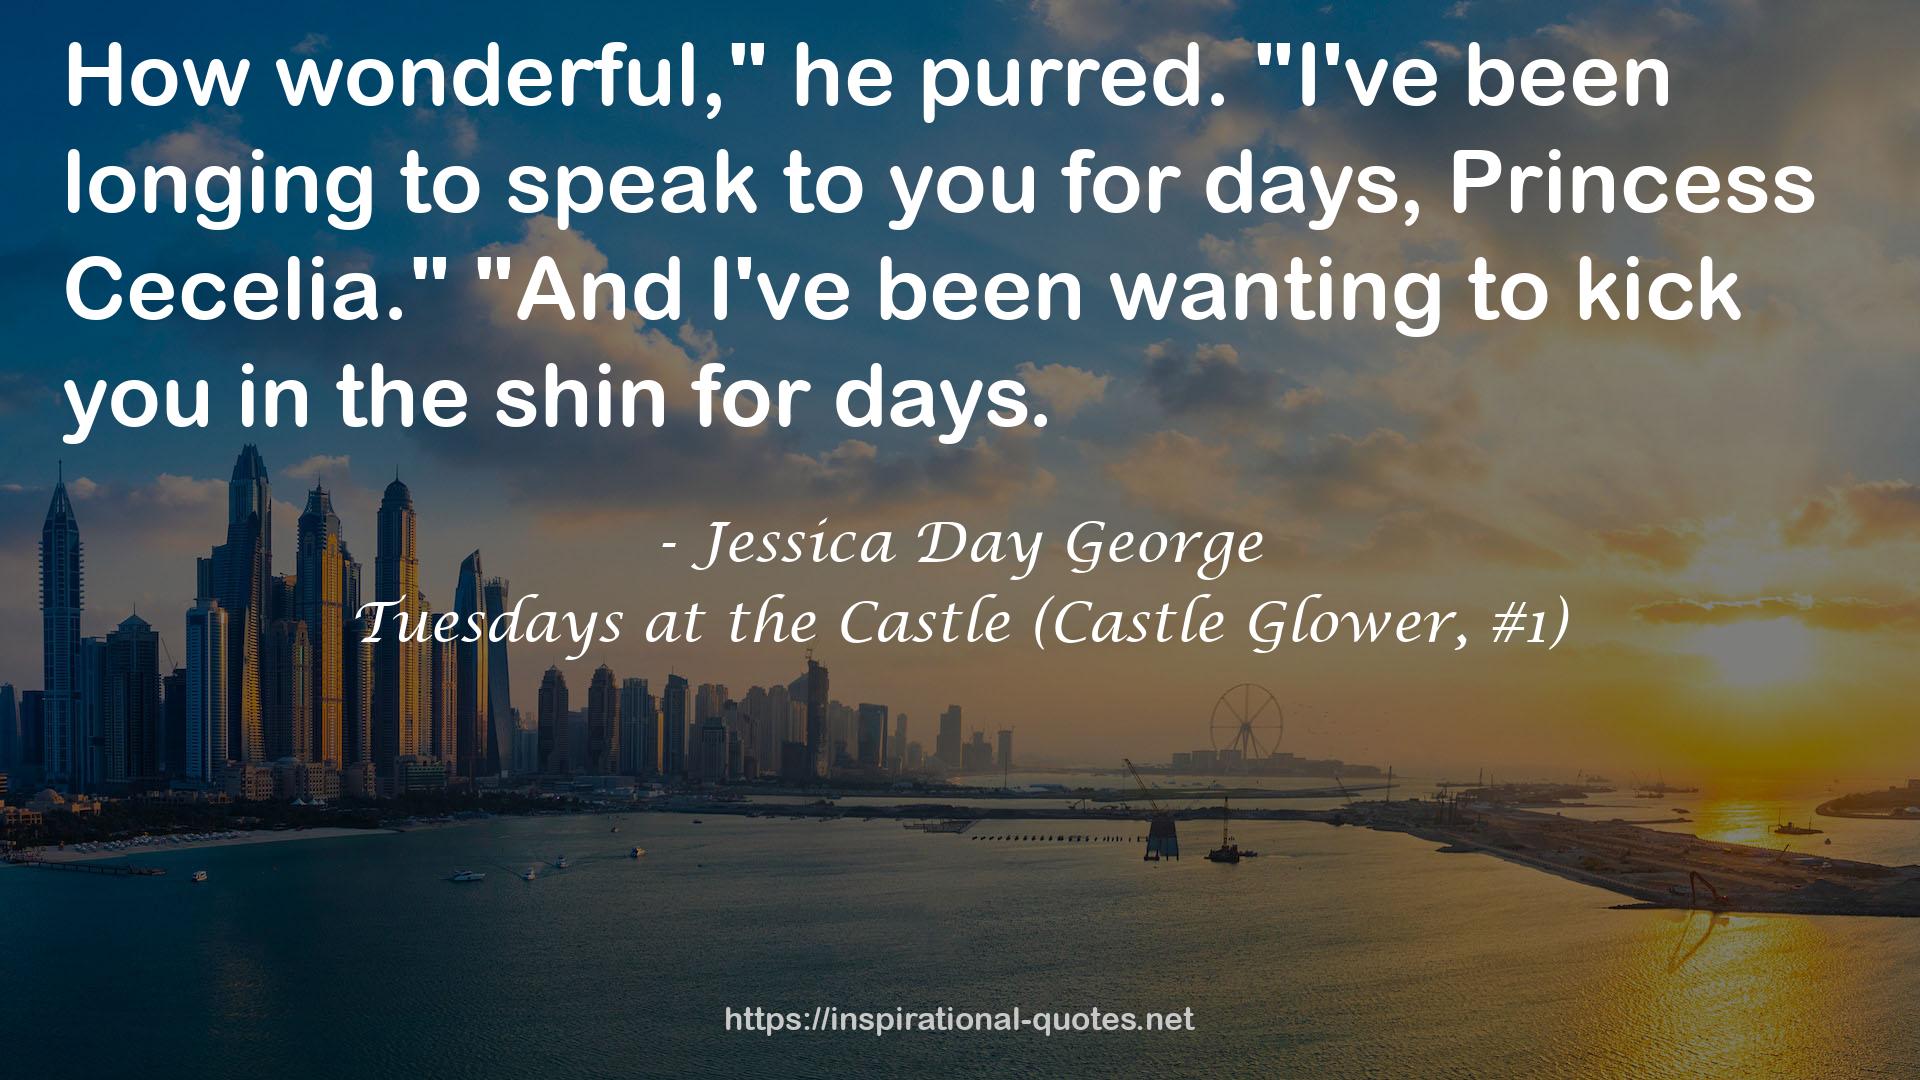 Tuesdays at the Castle (Castle Glower, #1) QUOTES